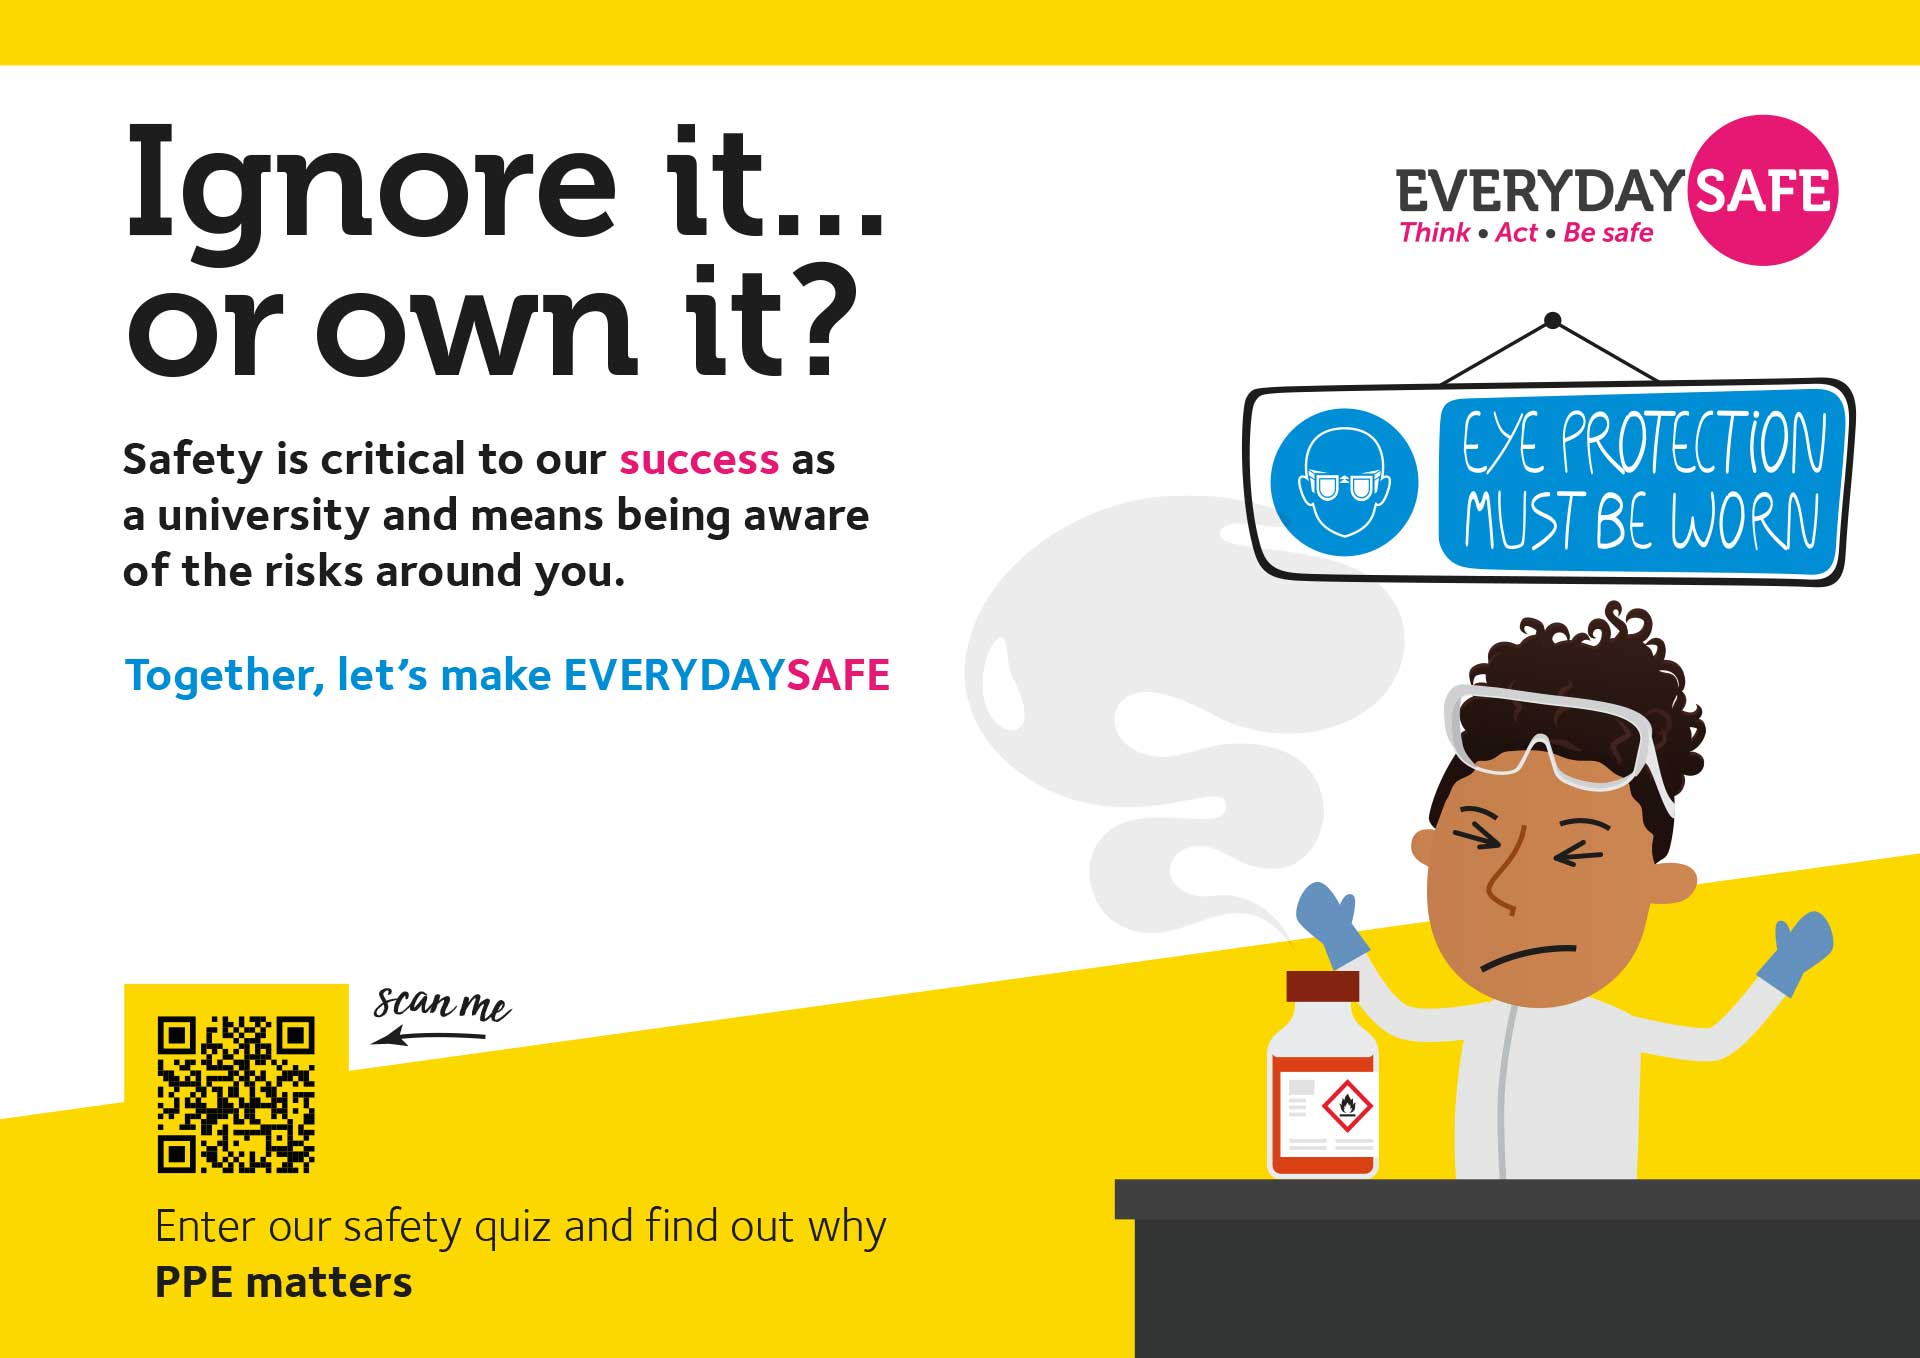 EveryDaySafe poster highlighting the value of success